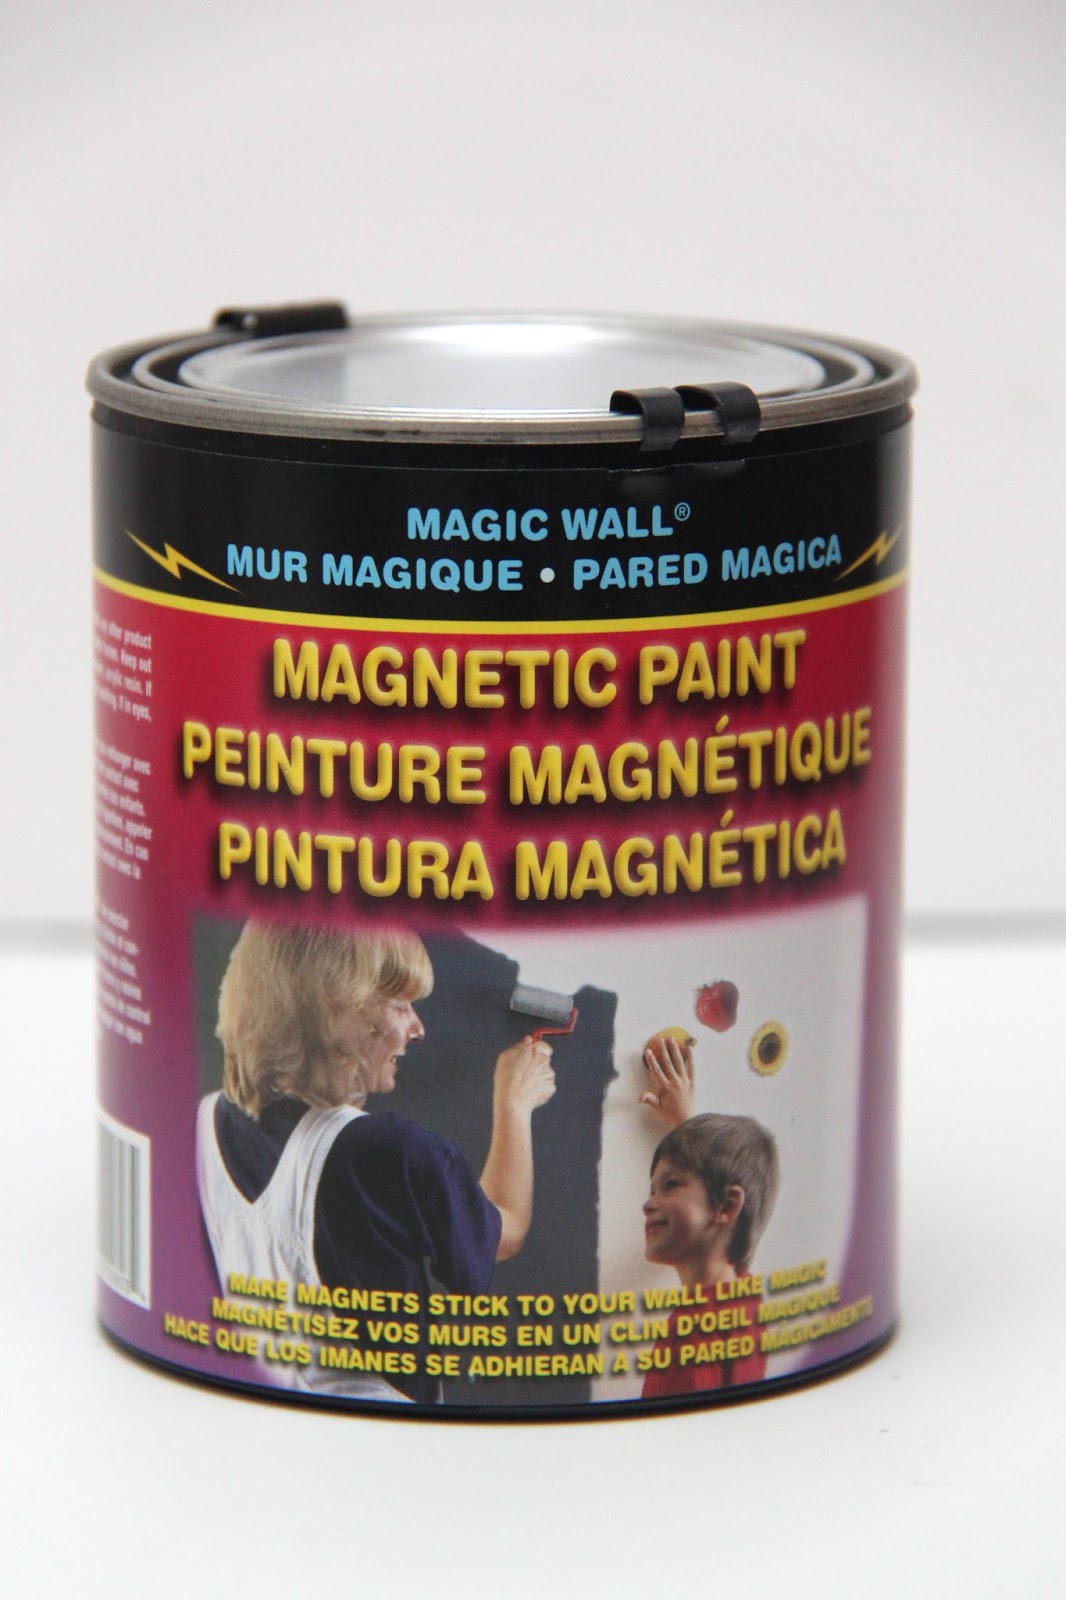 Magnetic Paint: How To Use and Tips